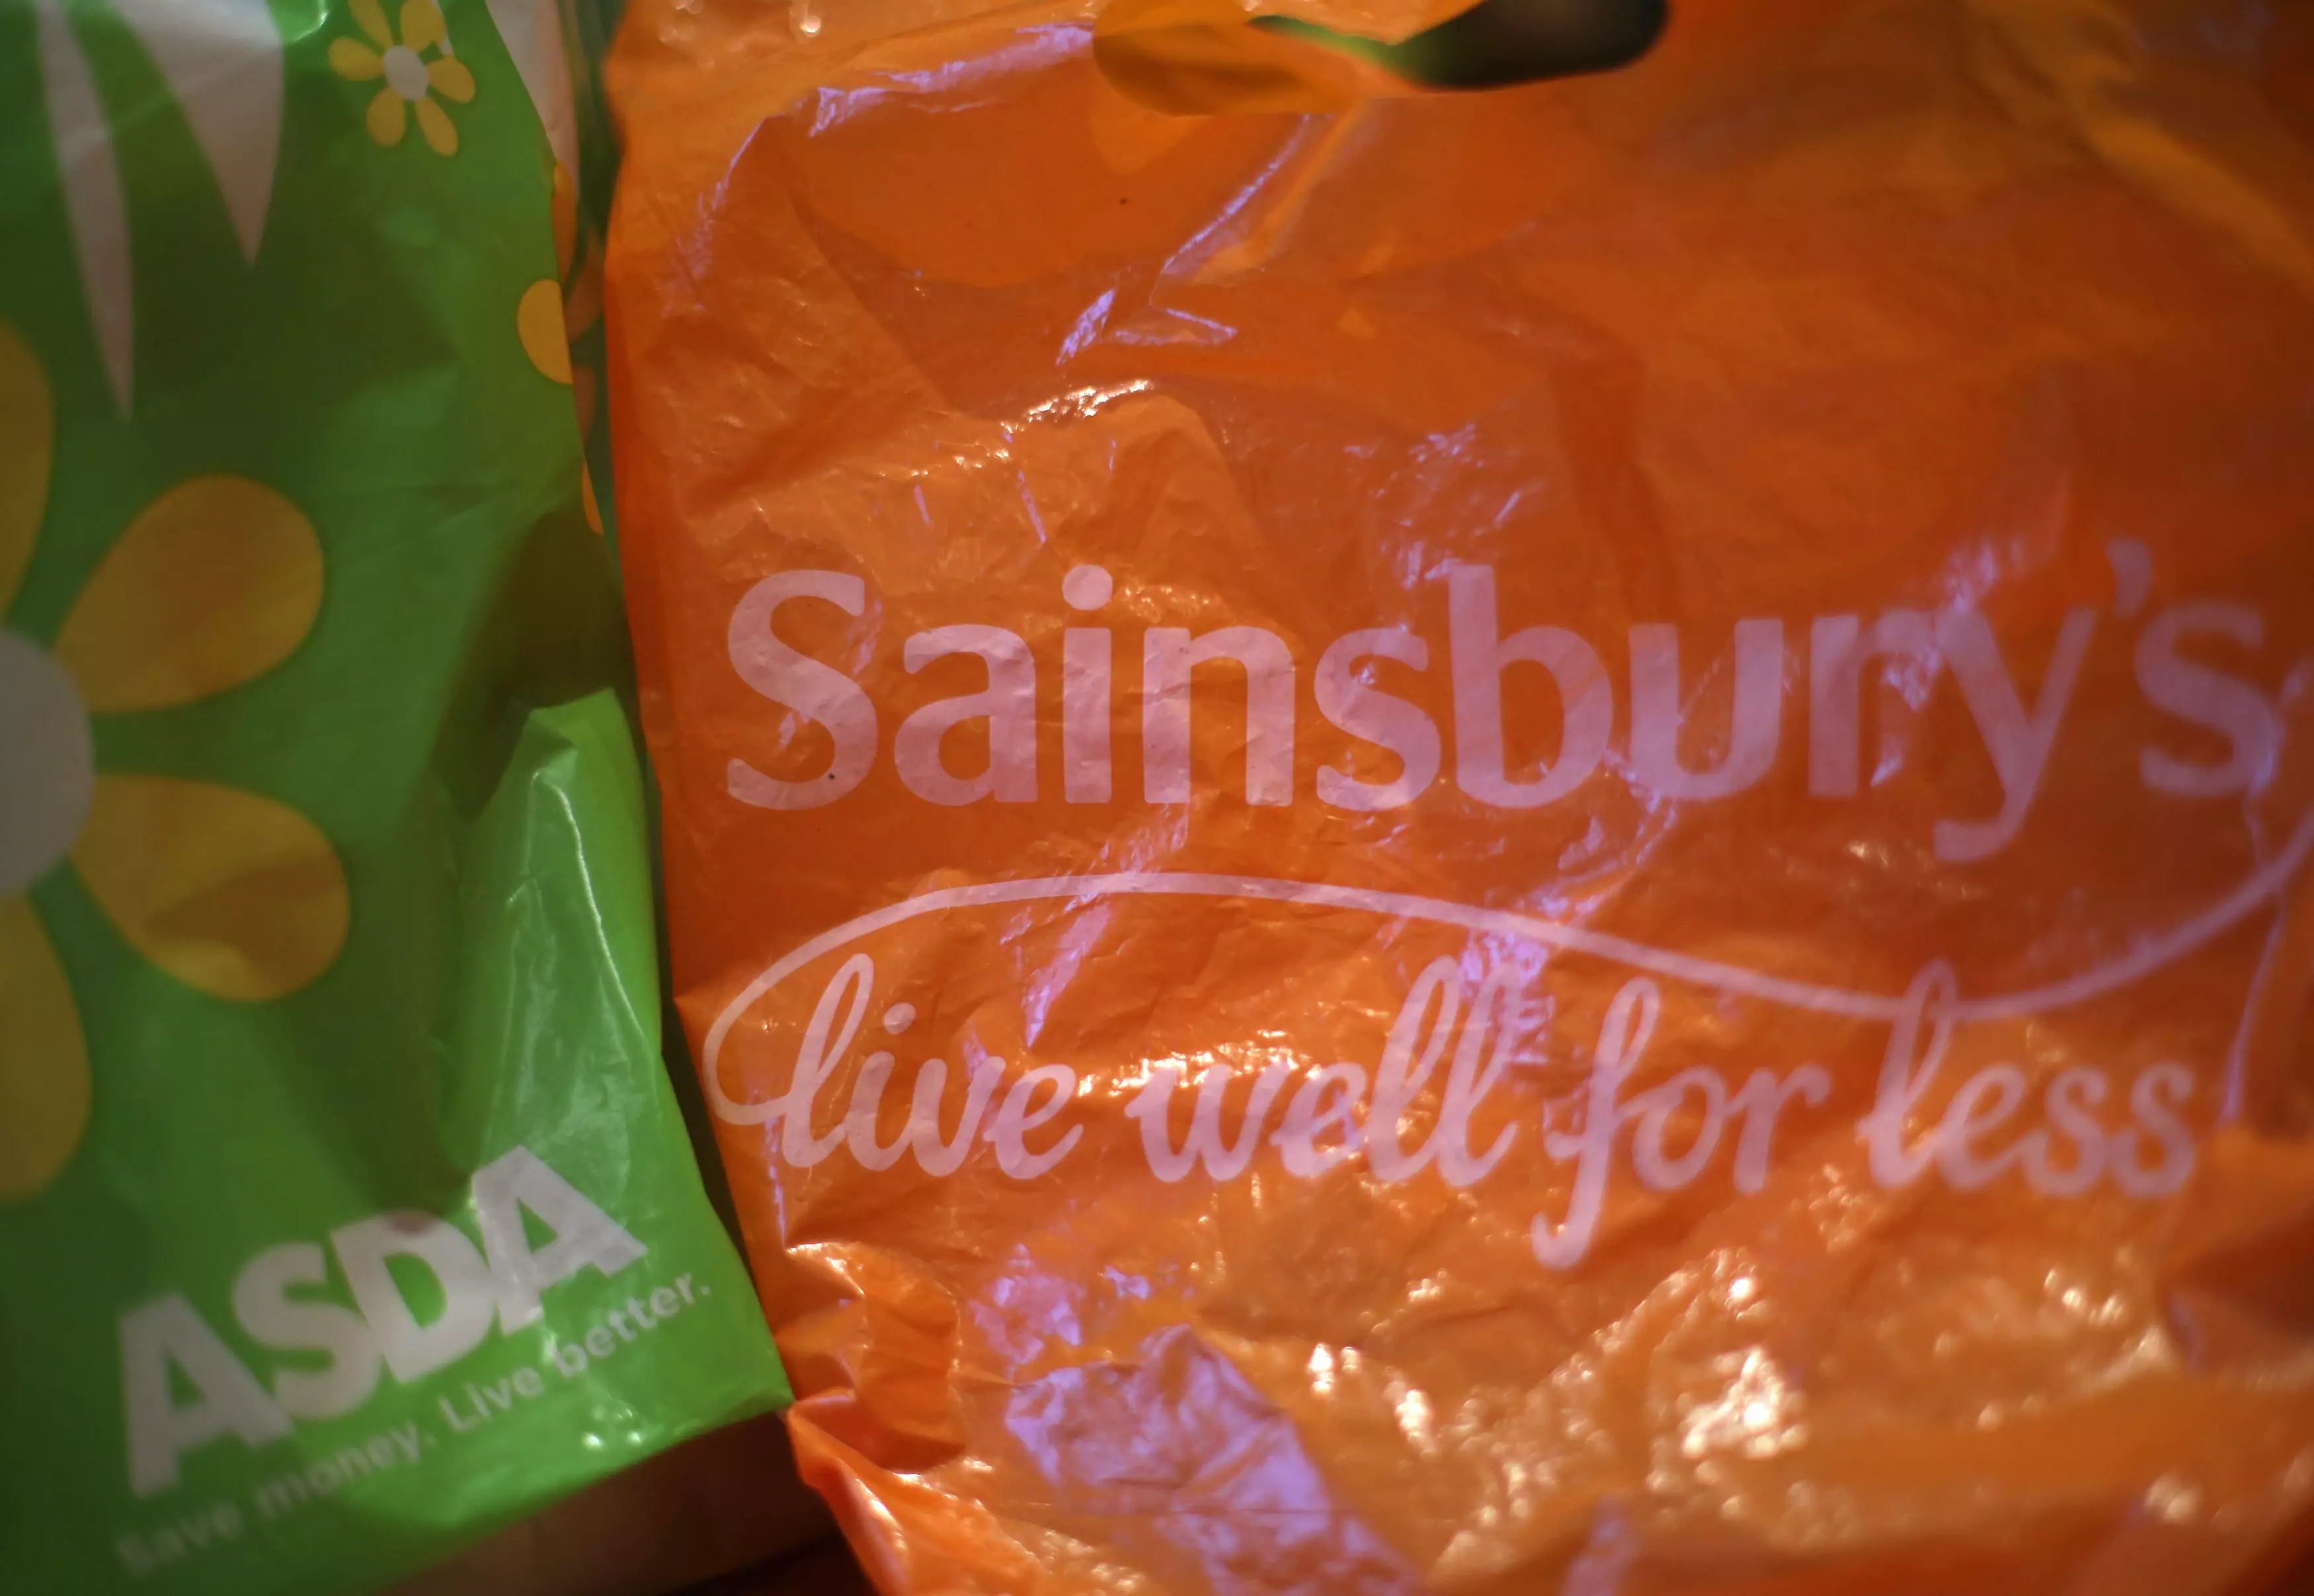 Experts are concerned about the use of sturdier, 'bags for life' like the plastic bags pictured here (